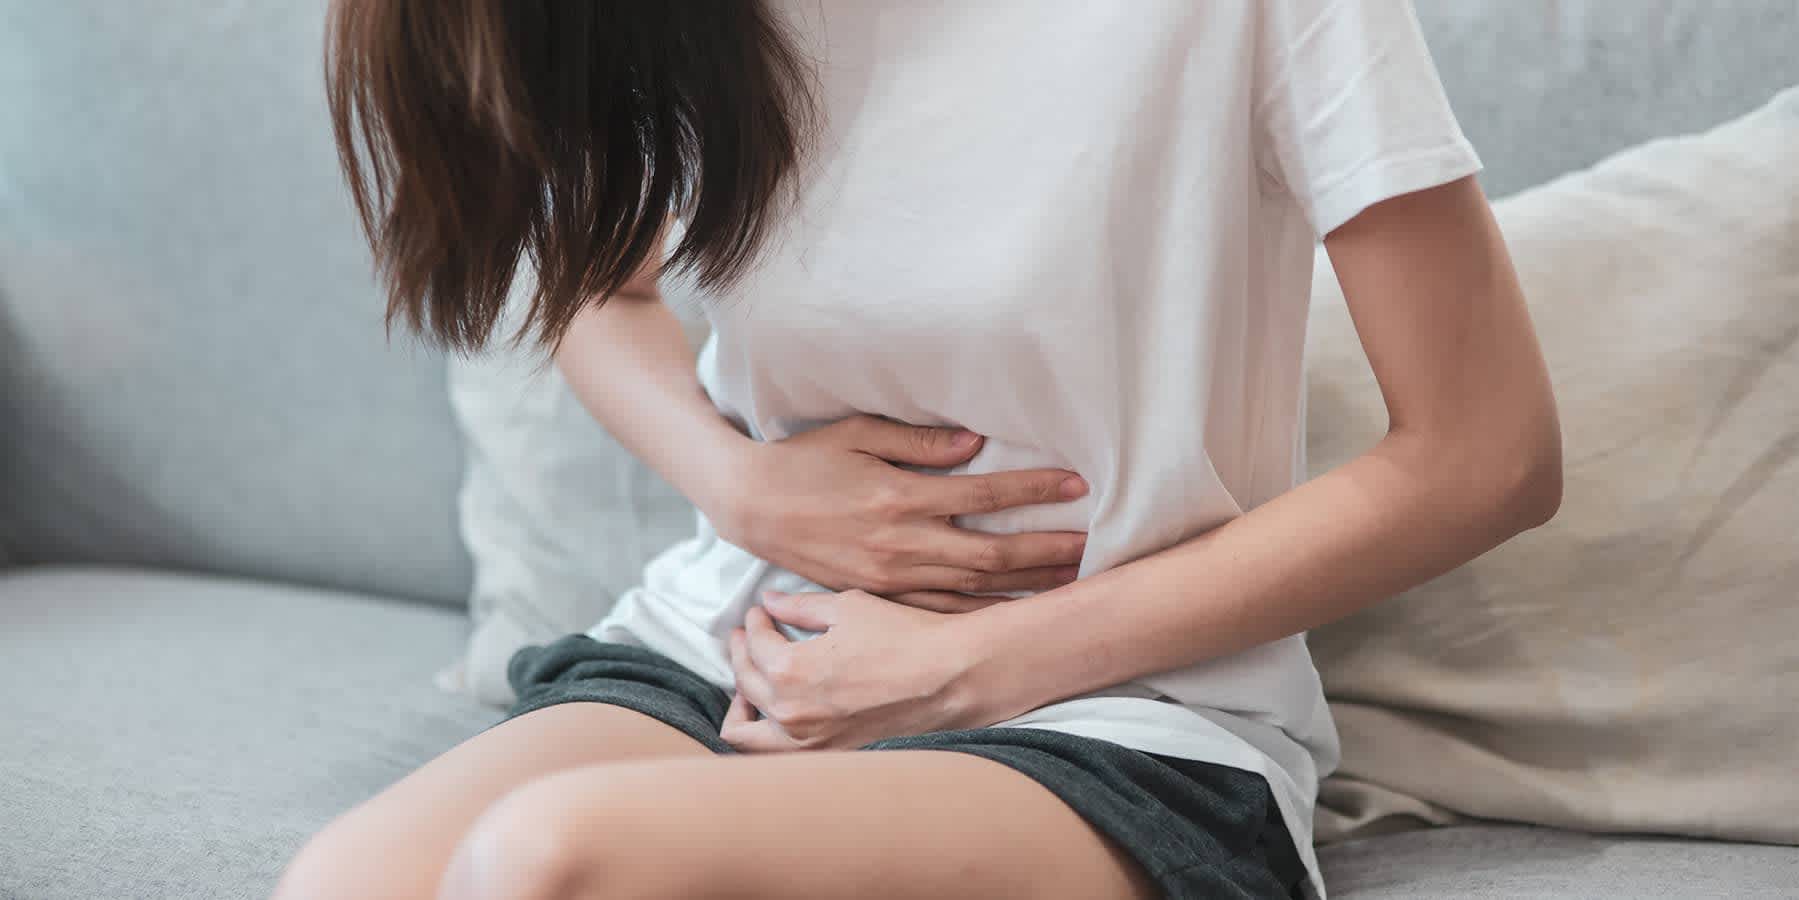 Woman experiencing uncomfortable symptoms and wondering what causes pelvic inflammatory disease